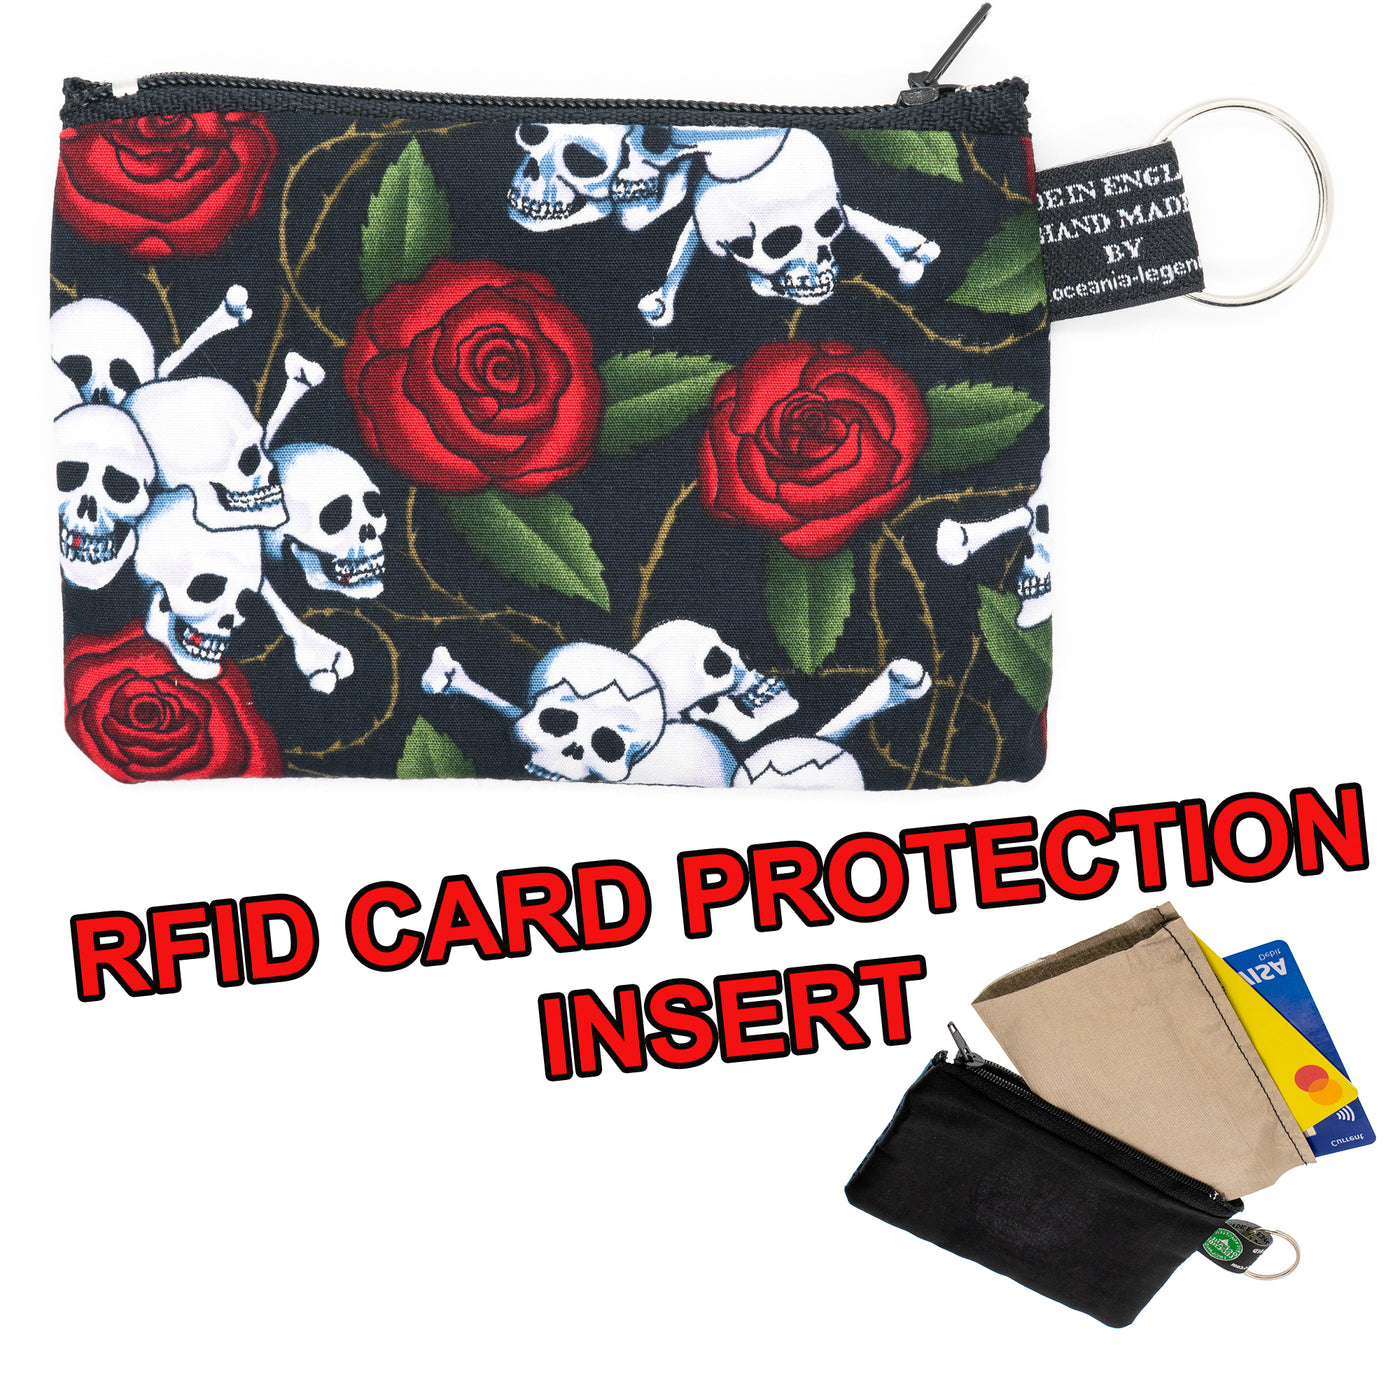 Black cotton purse with a skull & crossbones & rose design, zipped purse with RFID Protection